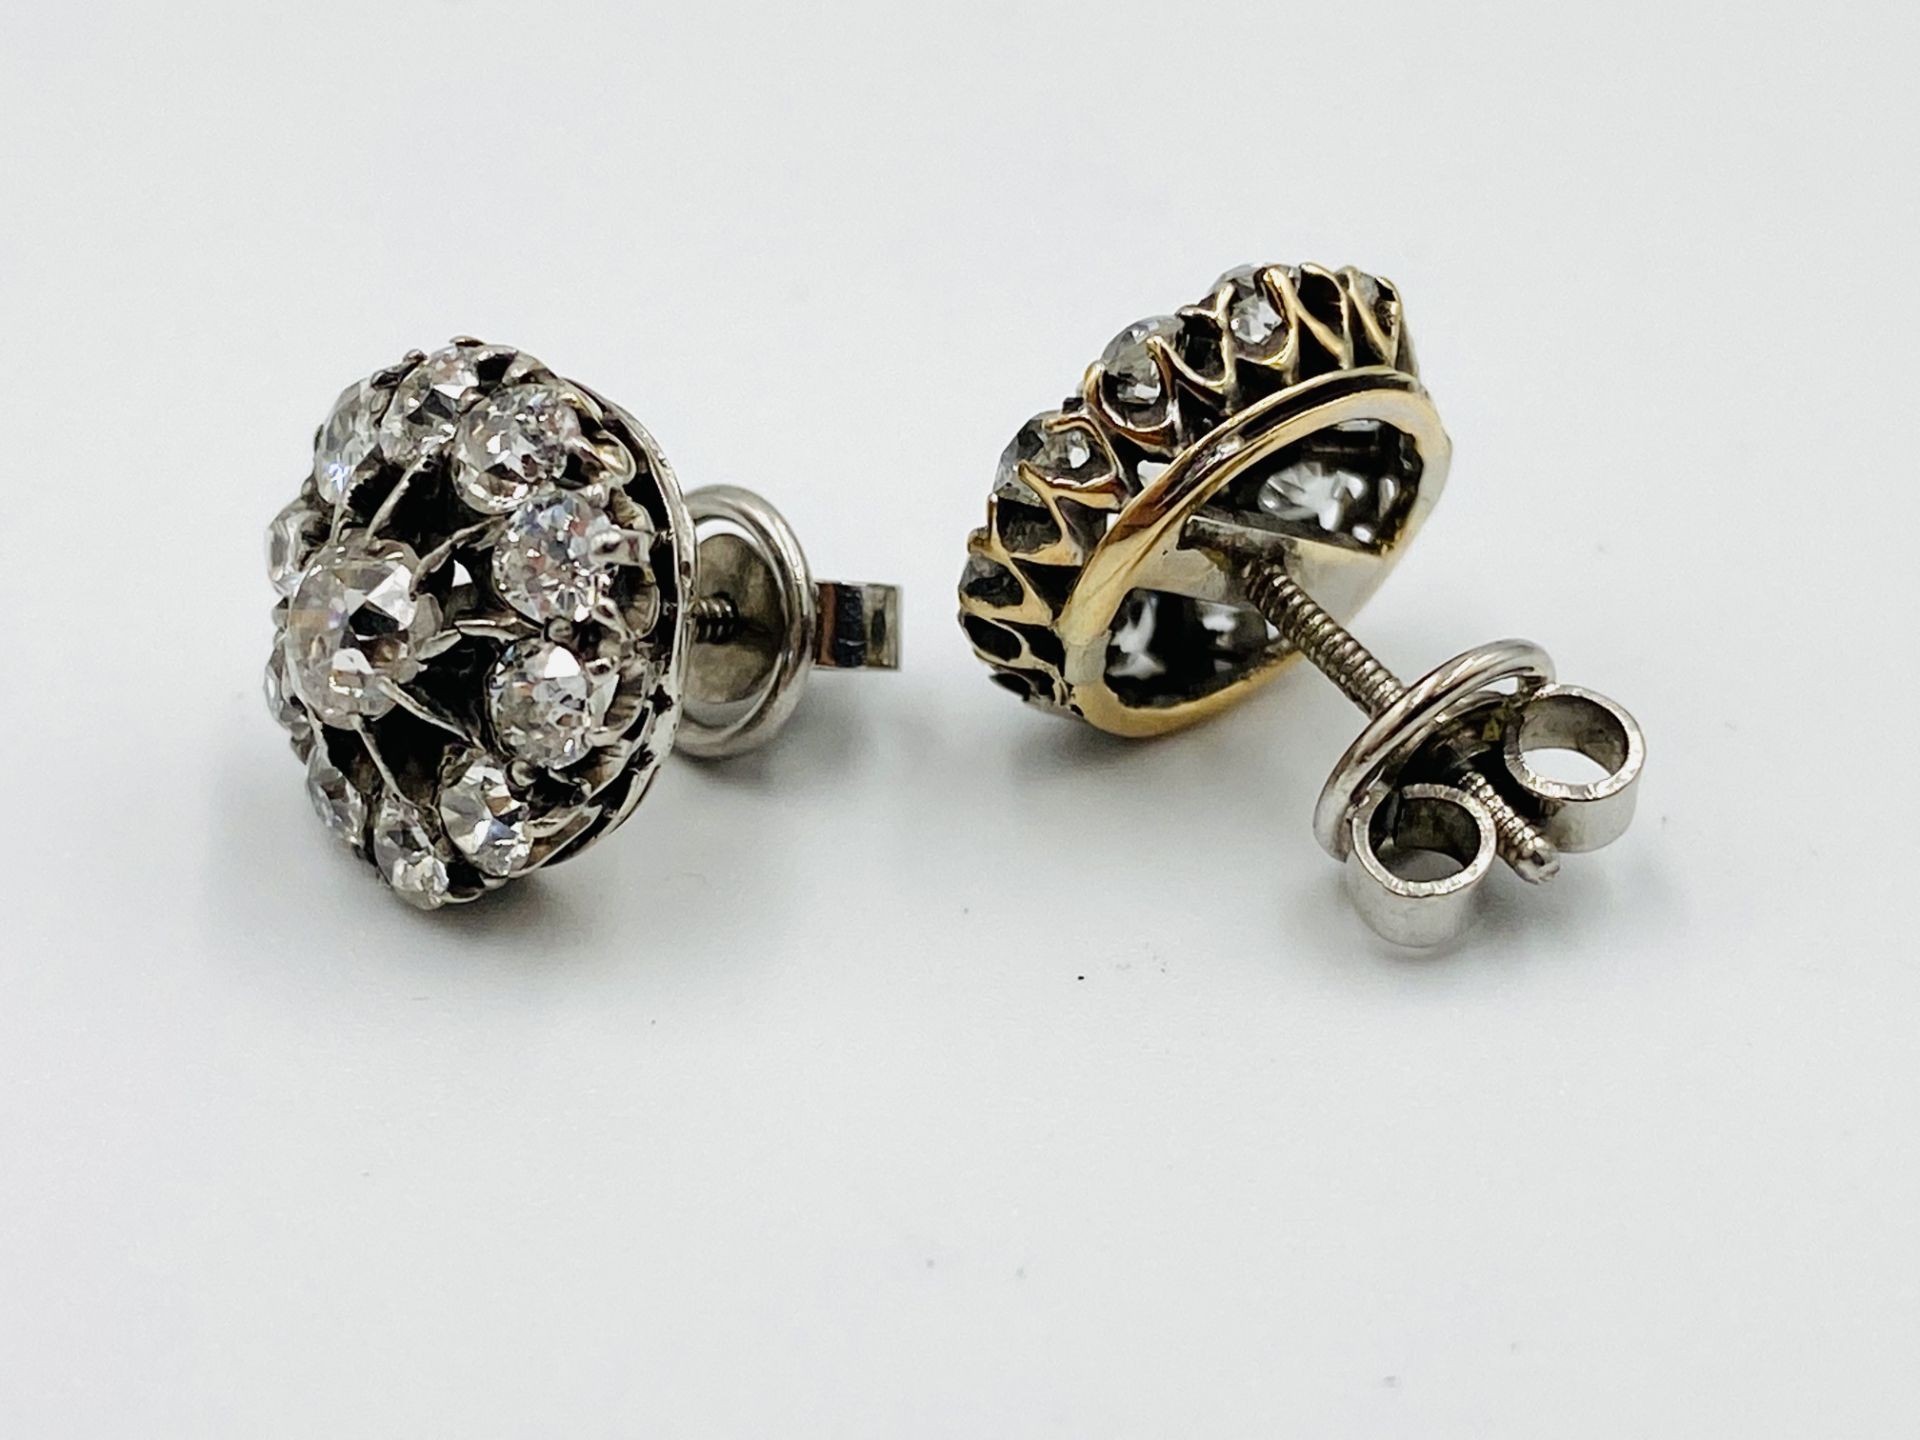 Pair of Victorian white gold and diamond floral earrings - Image 4 of 4